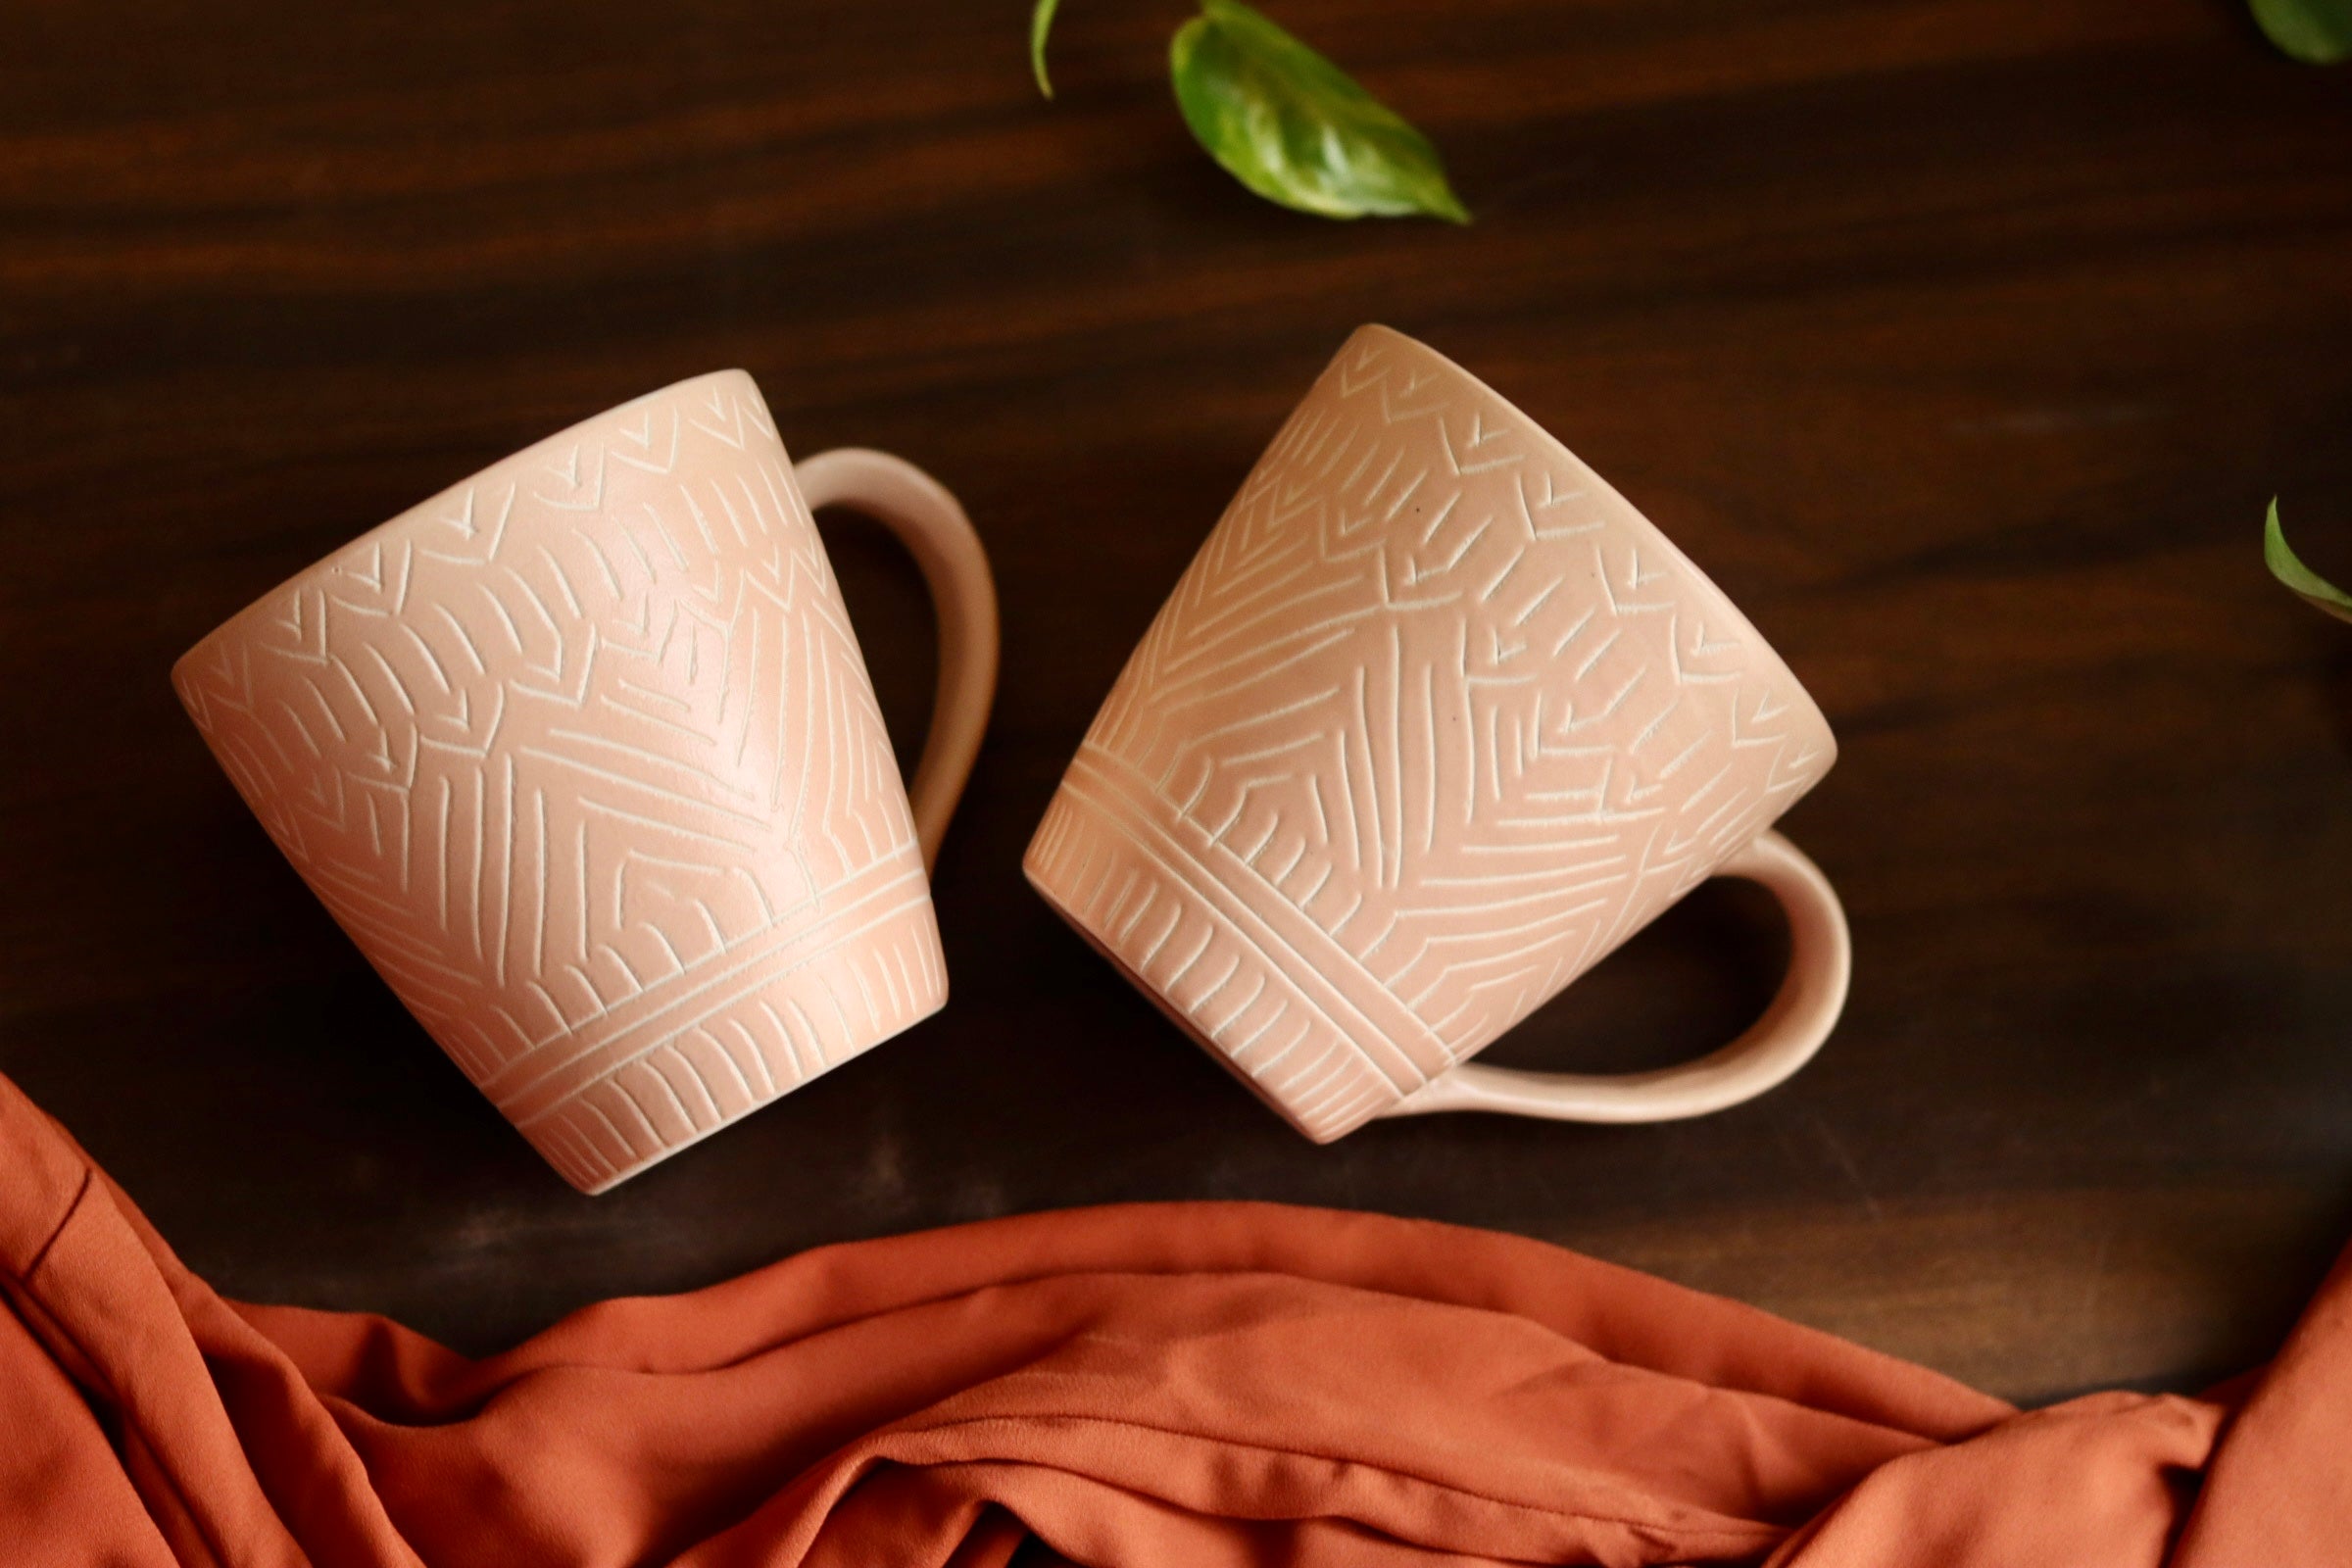 Blush pink carved coffee mug laying on wooden surface